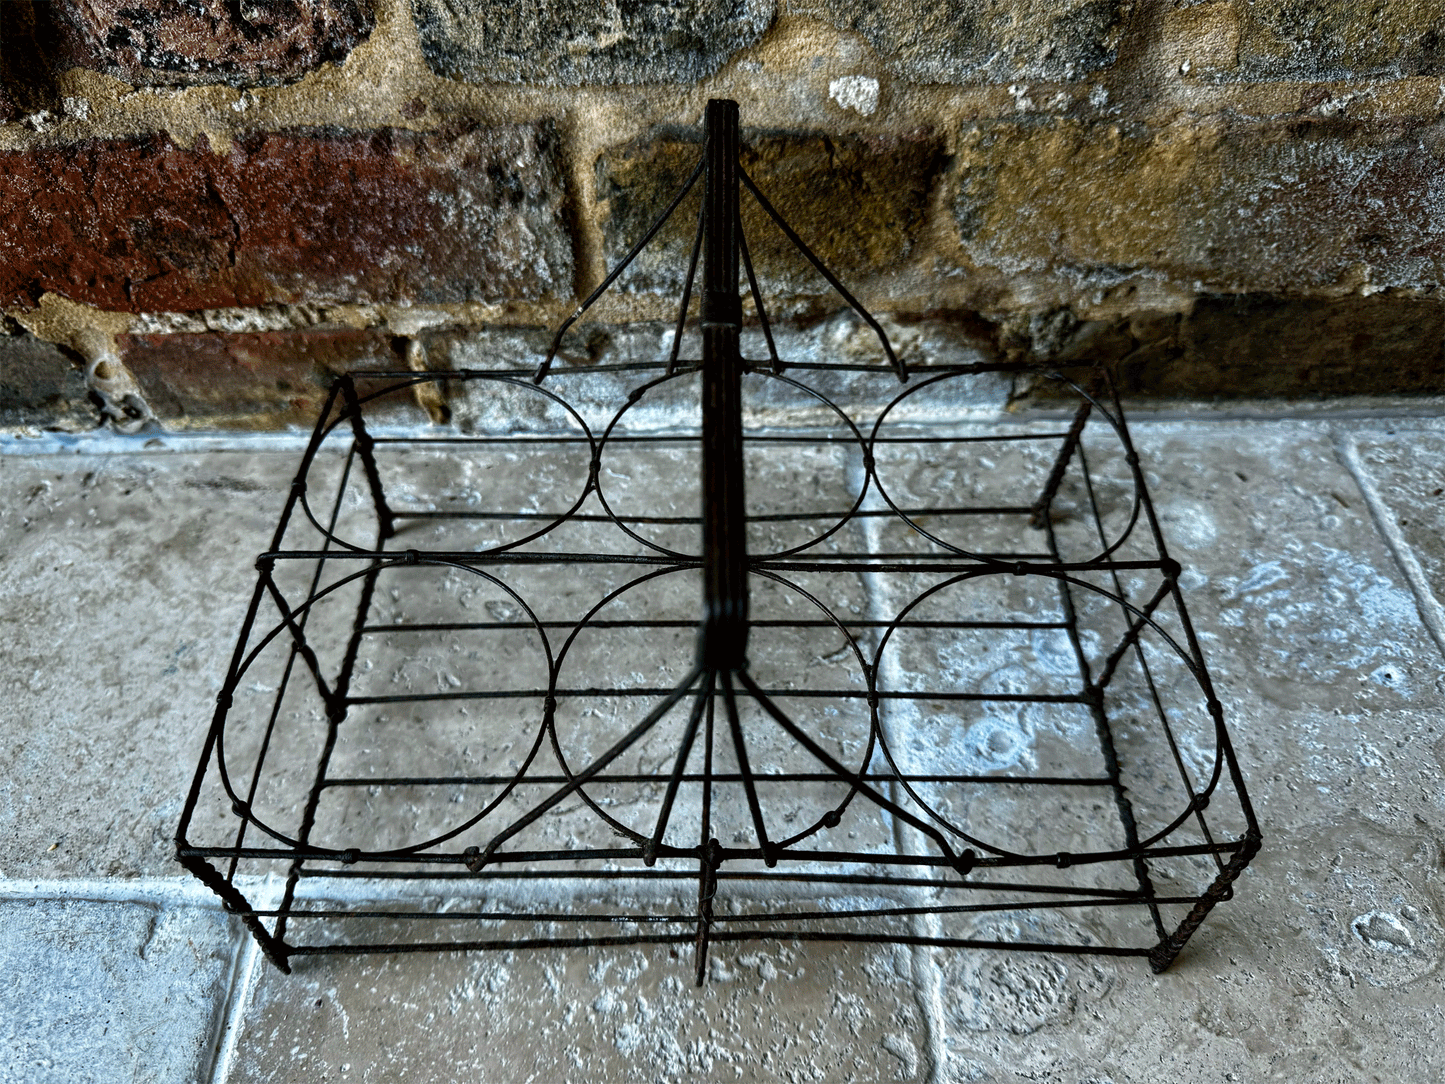 rare antique french wirework pastis holder tray carrier